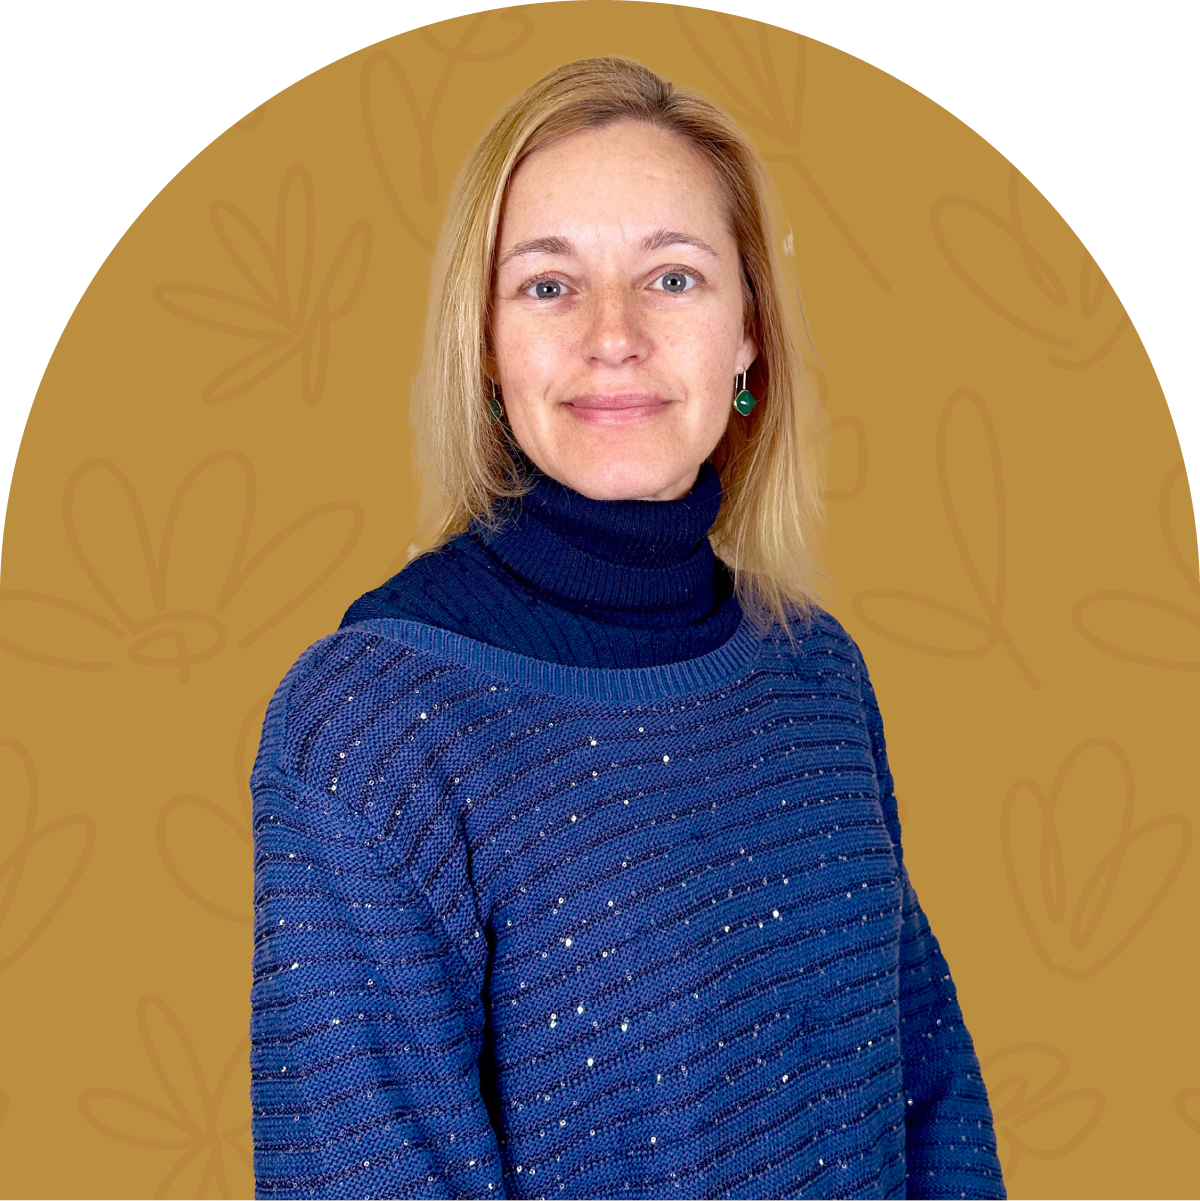 Portrait of Jayne, a green-loving team member at Fabulous Flowers for 2.5 years, wearing a blue sweater and standing against a golden background. MEET THE TEAM at Fabulous Flowers and Gifts.